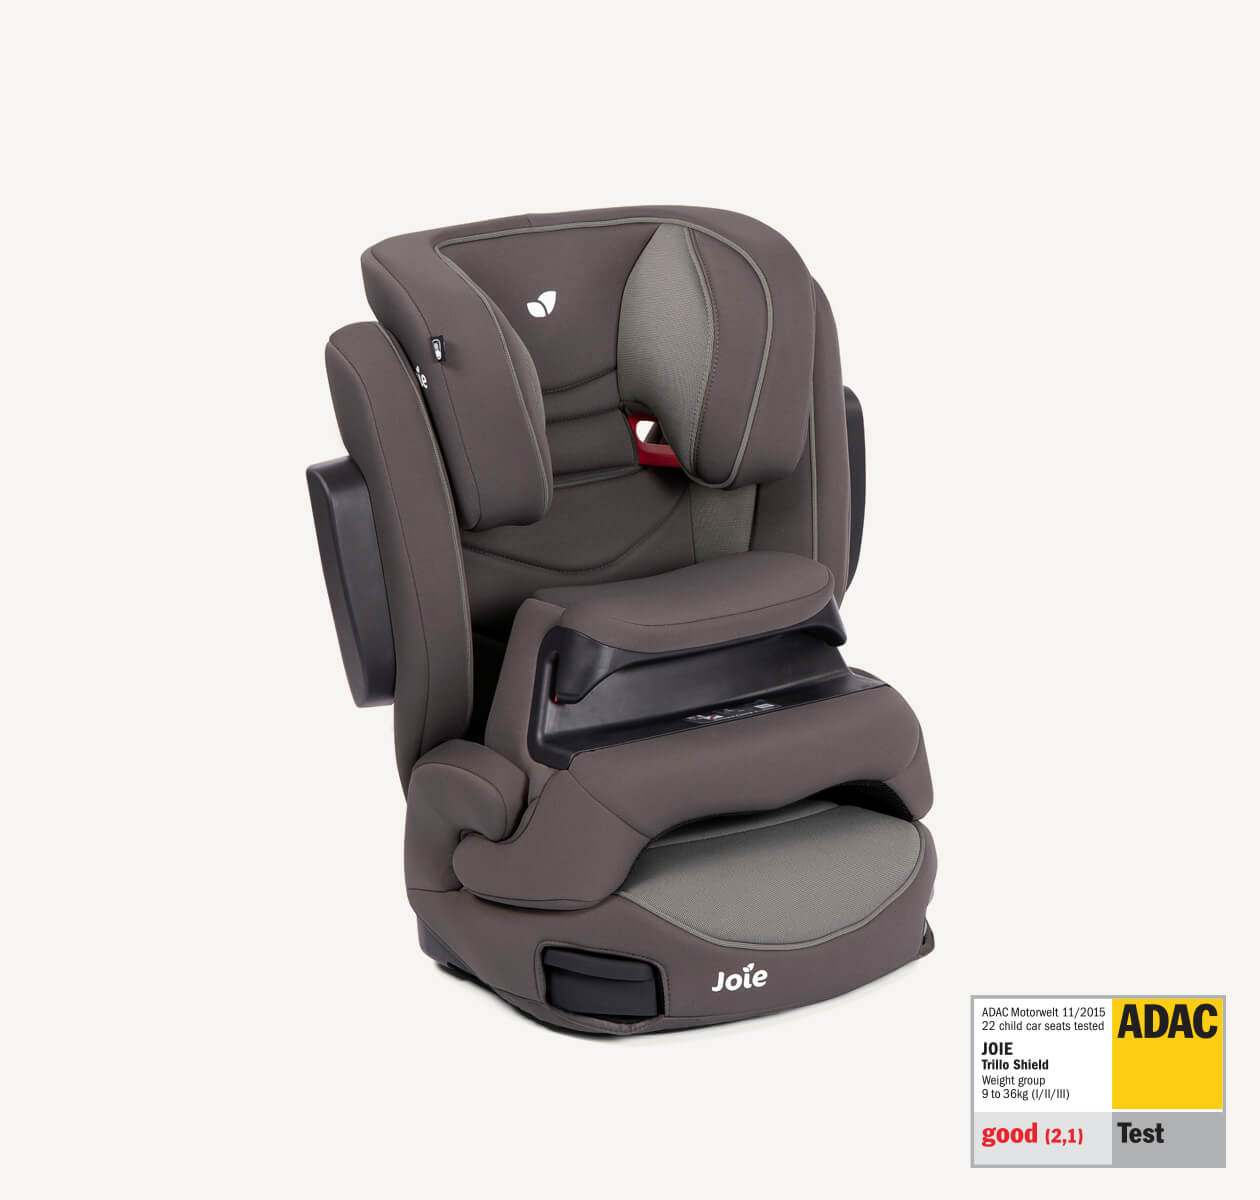   Joie trillo shield belted booster seat in medium brown positioned at a right angle, with the ADAC test label in the lower right corner.